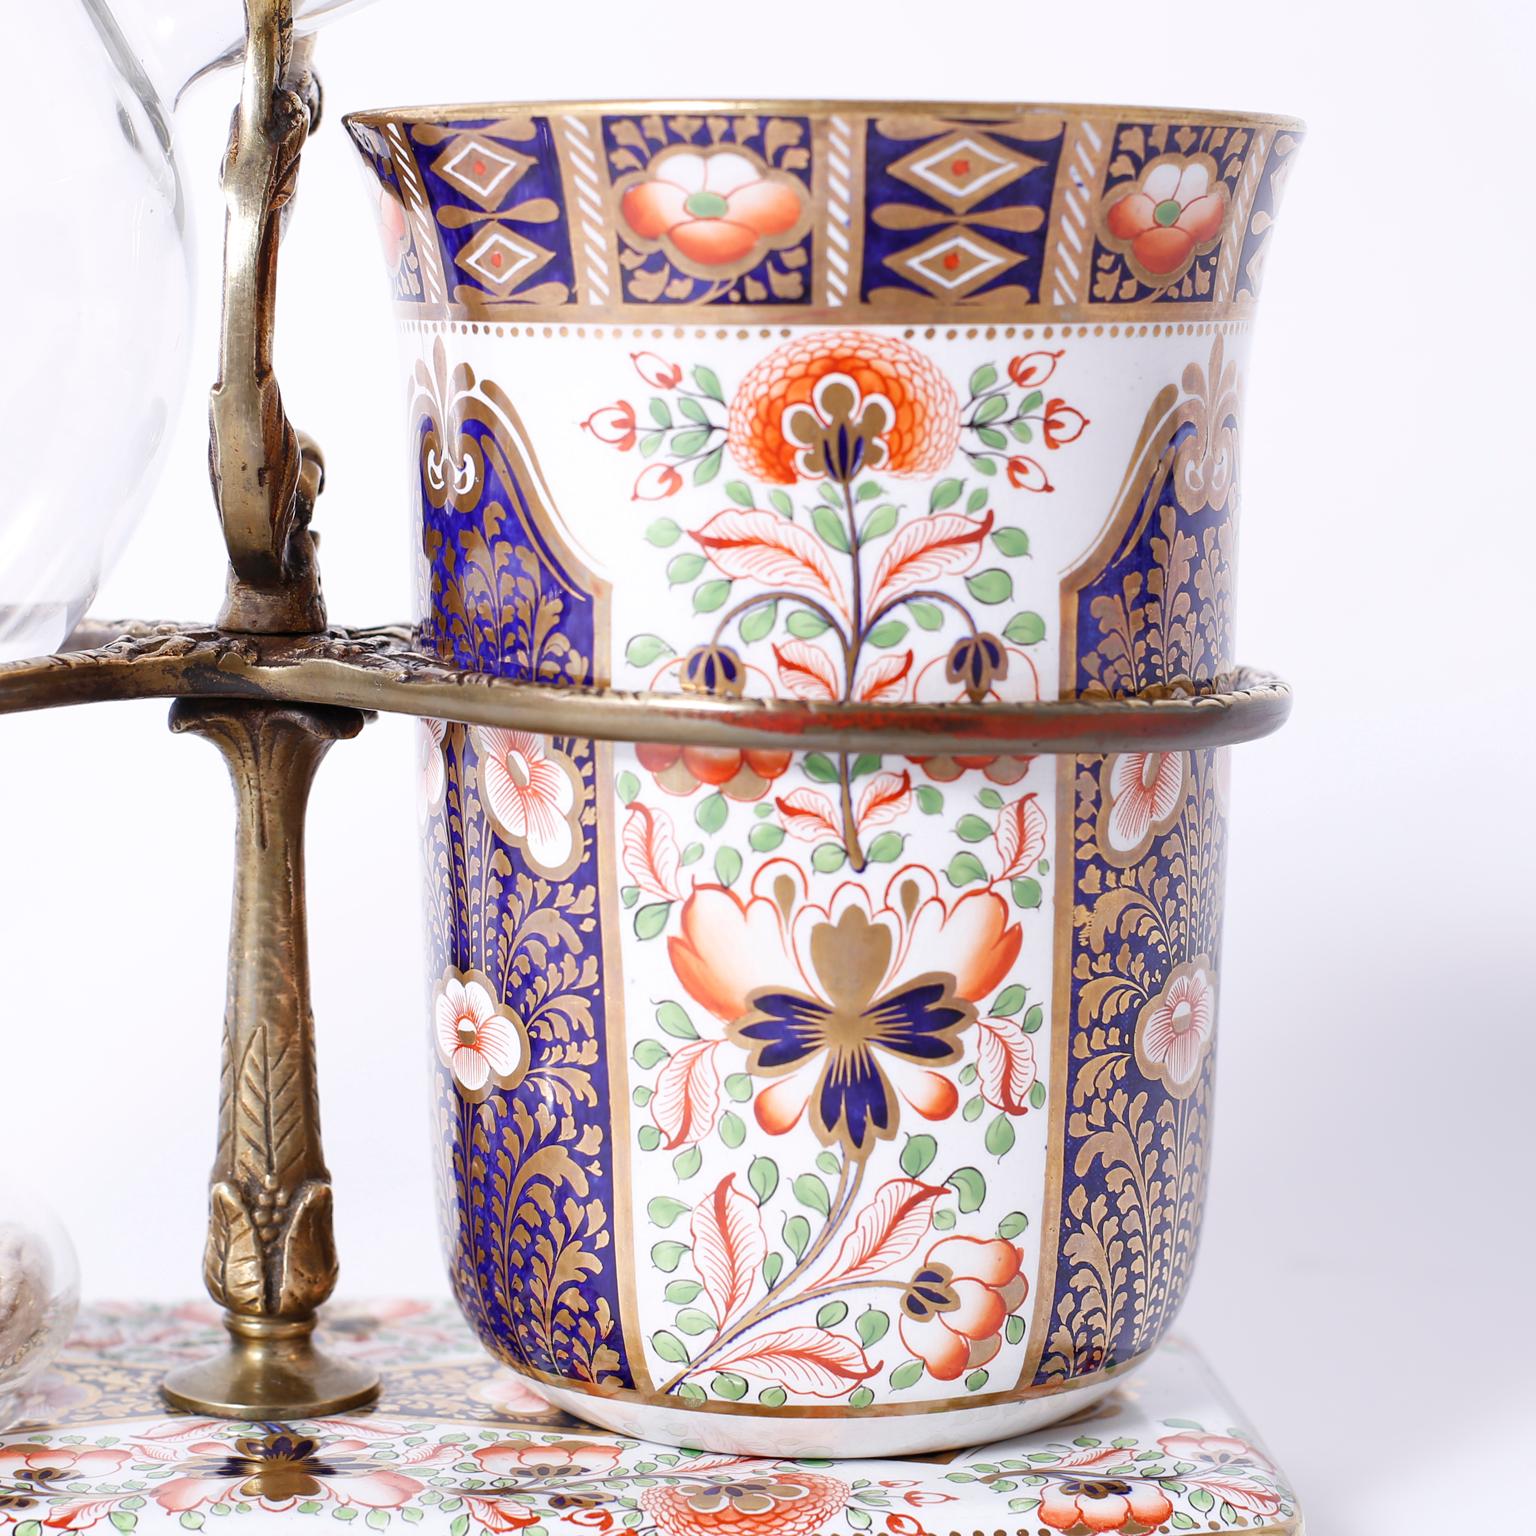 Rare and unusual Gaudy Welsh porcelain liquor warmer with original floral decorated flask and base, glass bottle and burner. The brass stand has hand tooled floral designs and the flask has a small hairline fracture.